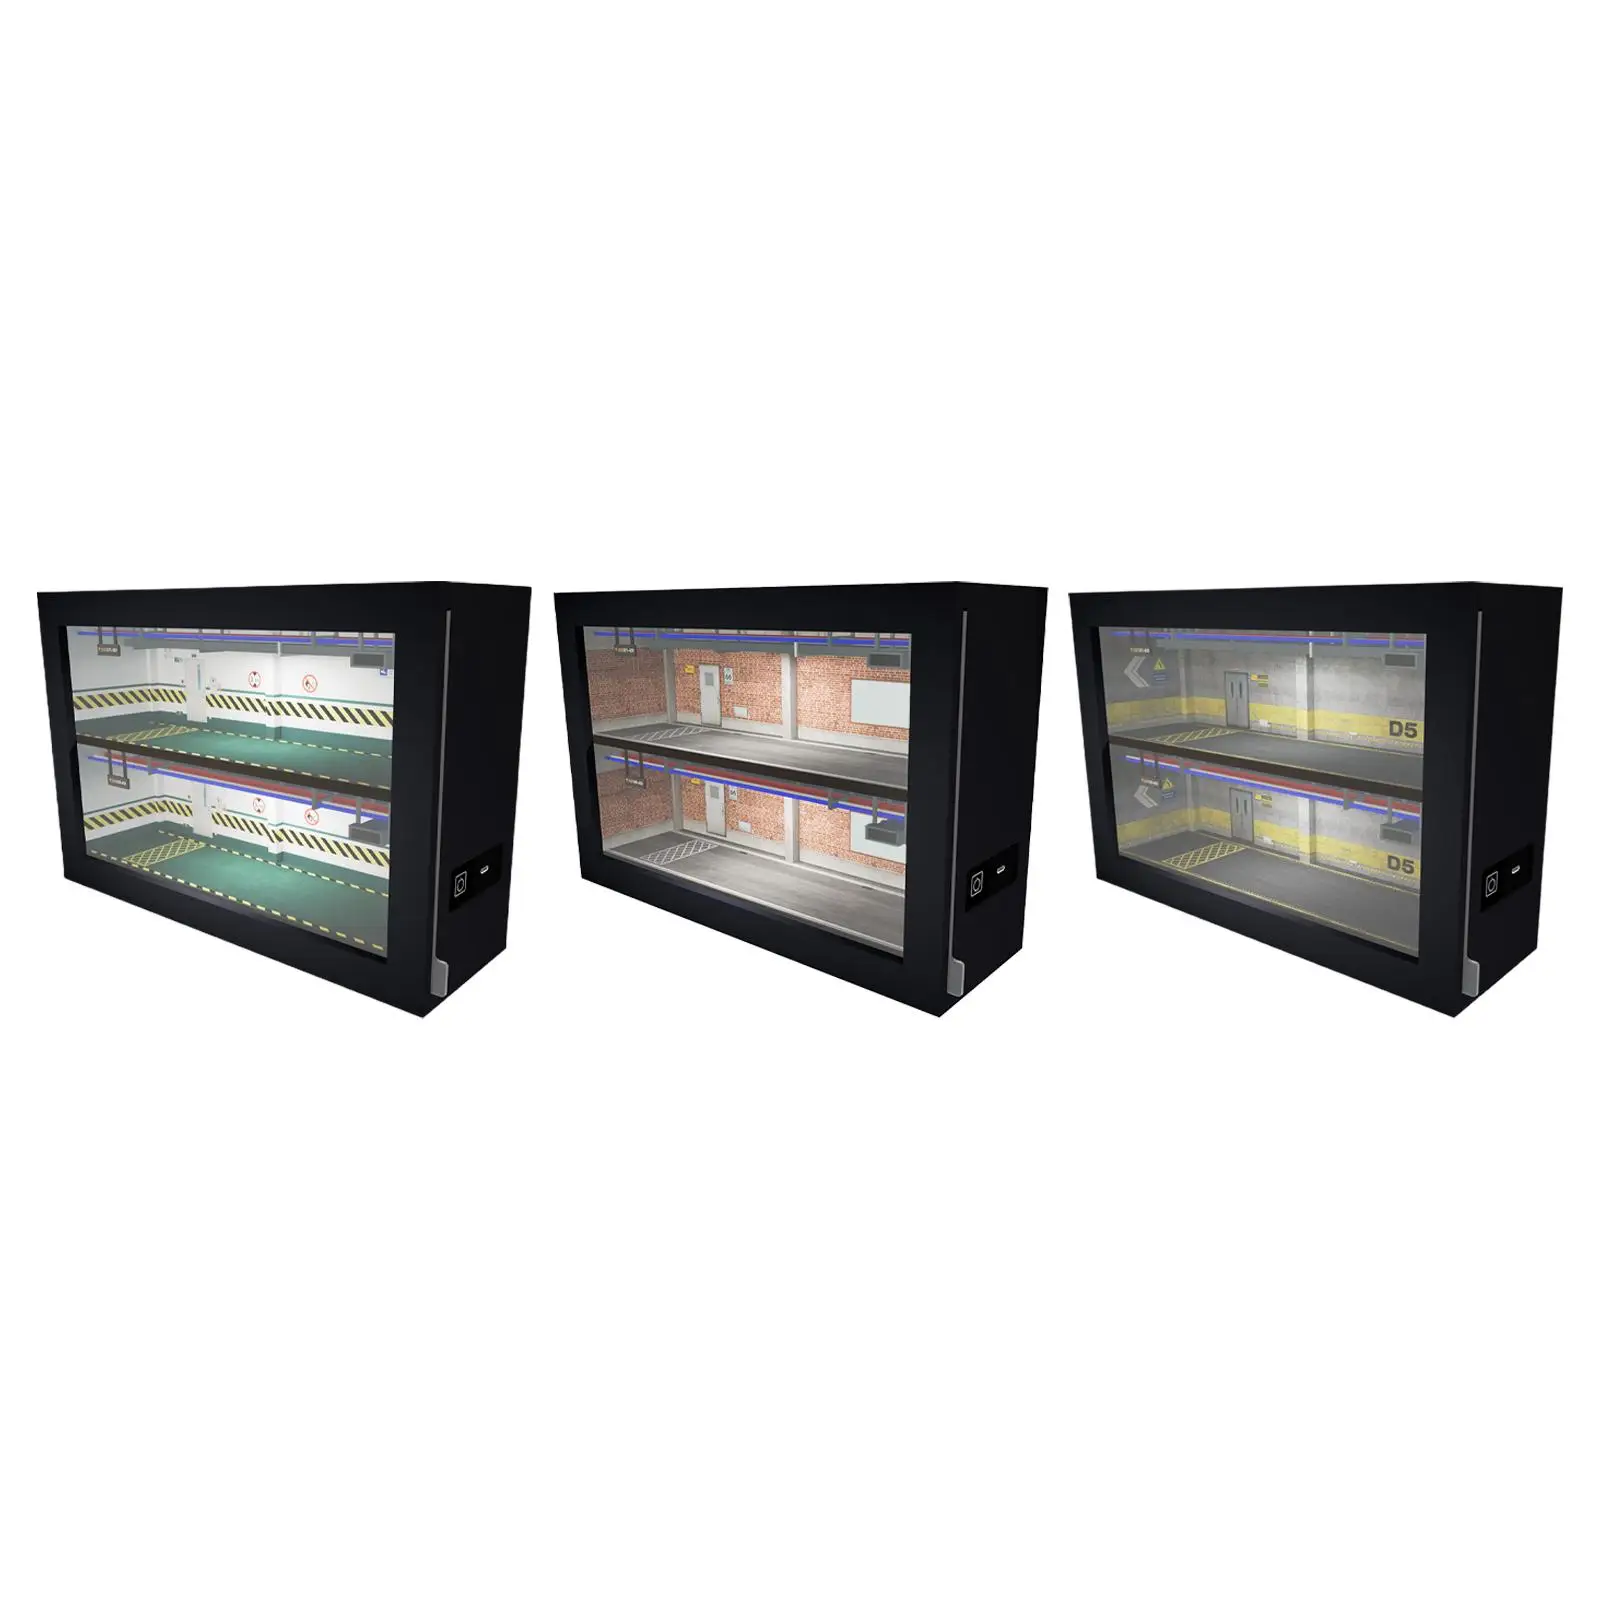 1:64 Garage Display Case Acrylic Cover Decoration Dustproof Double Layer with LED Showcase for Office Desk Countertop Bookshelf